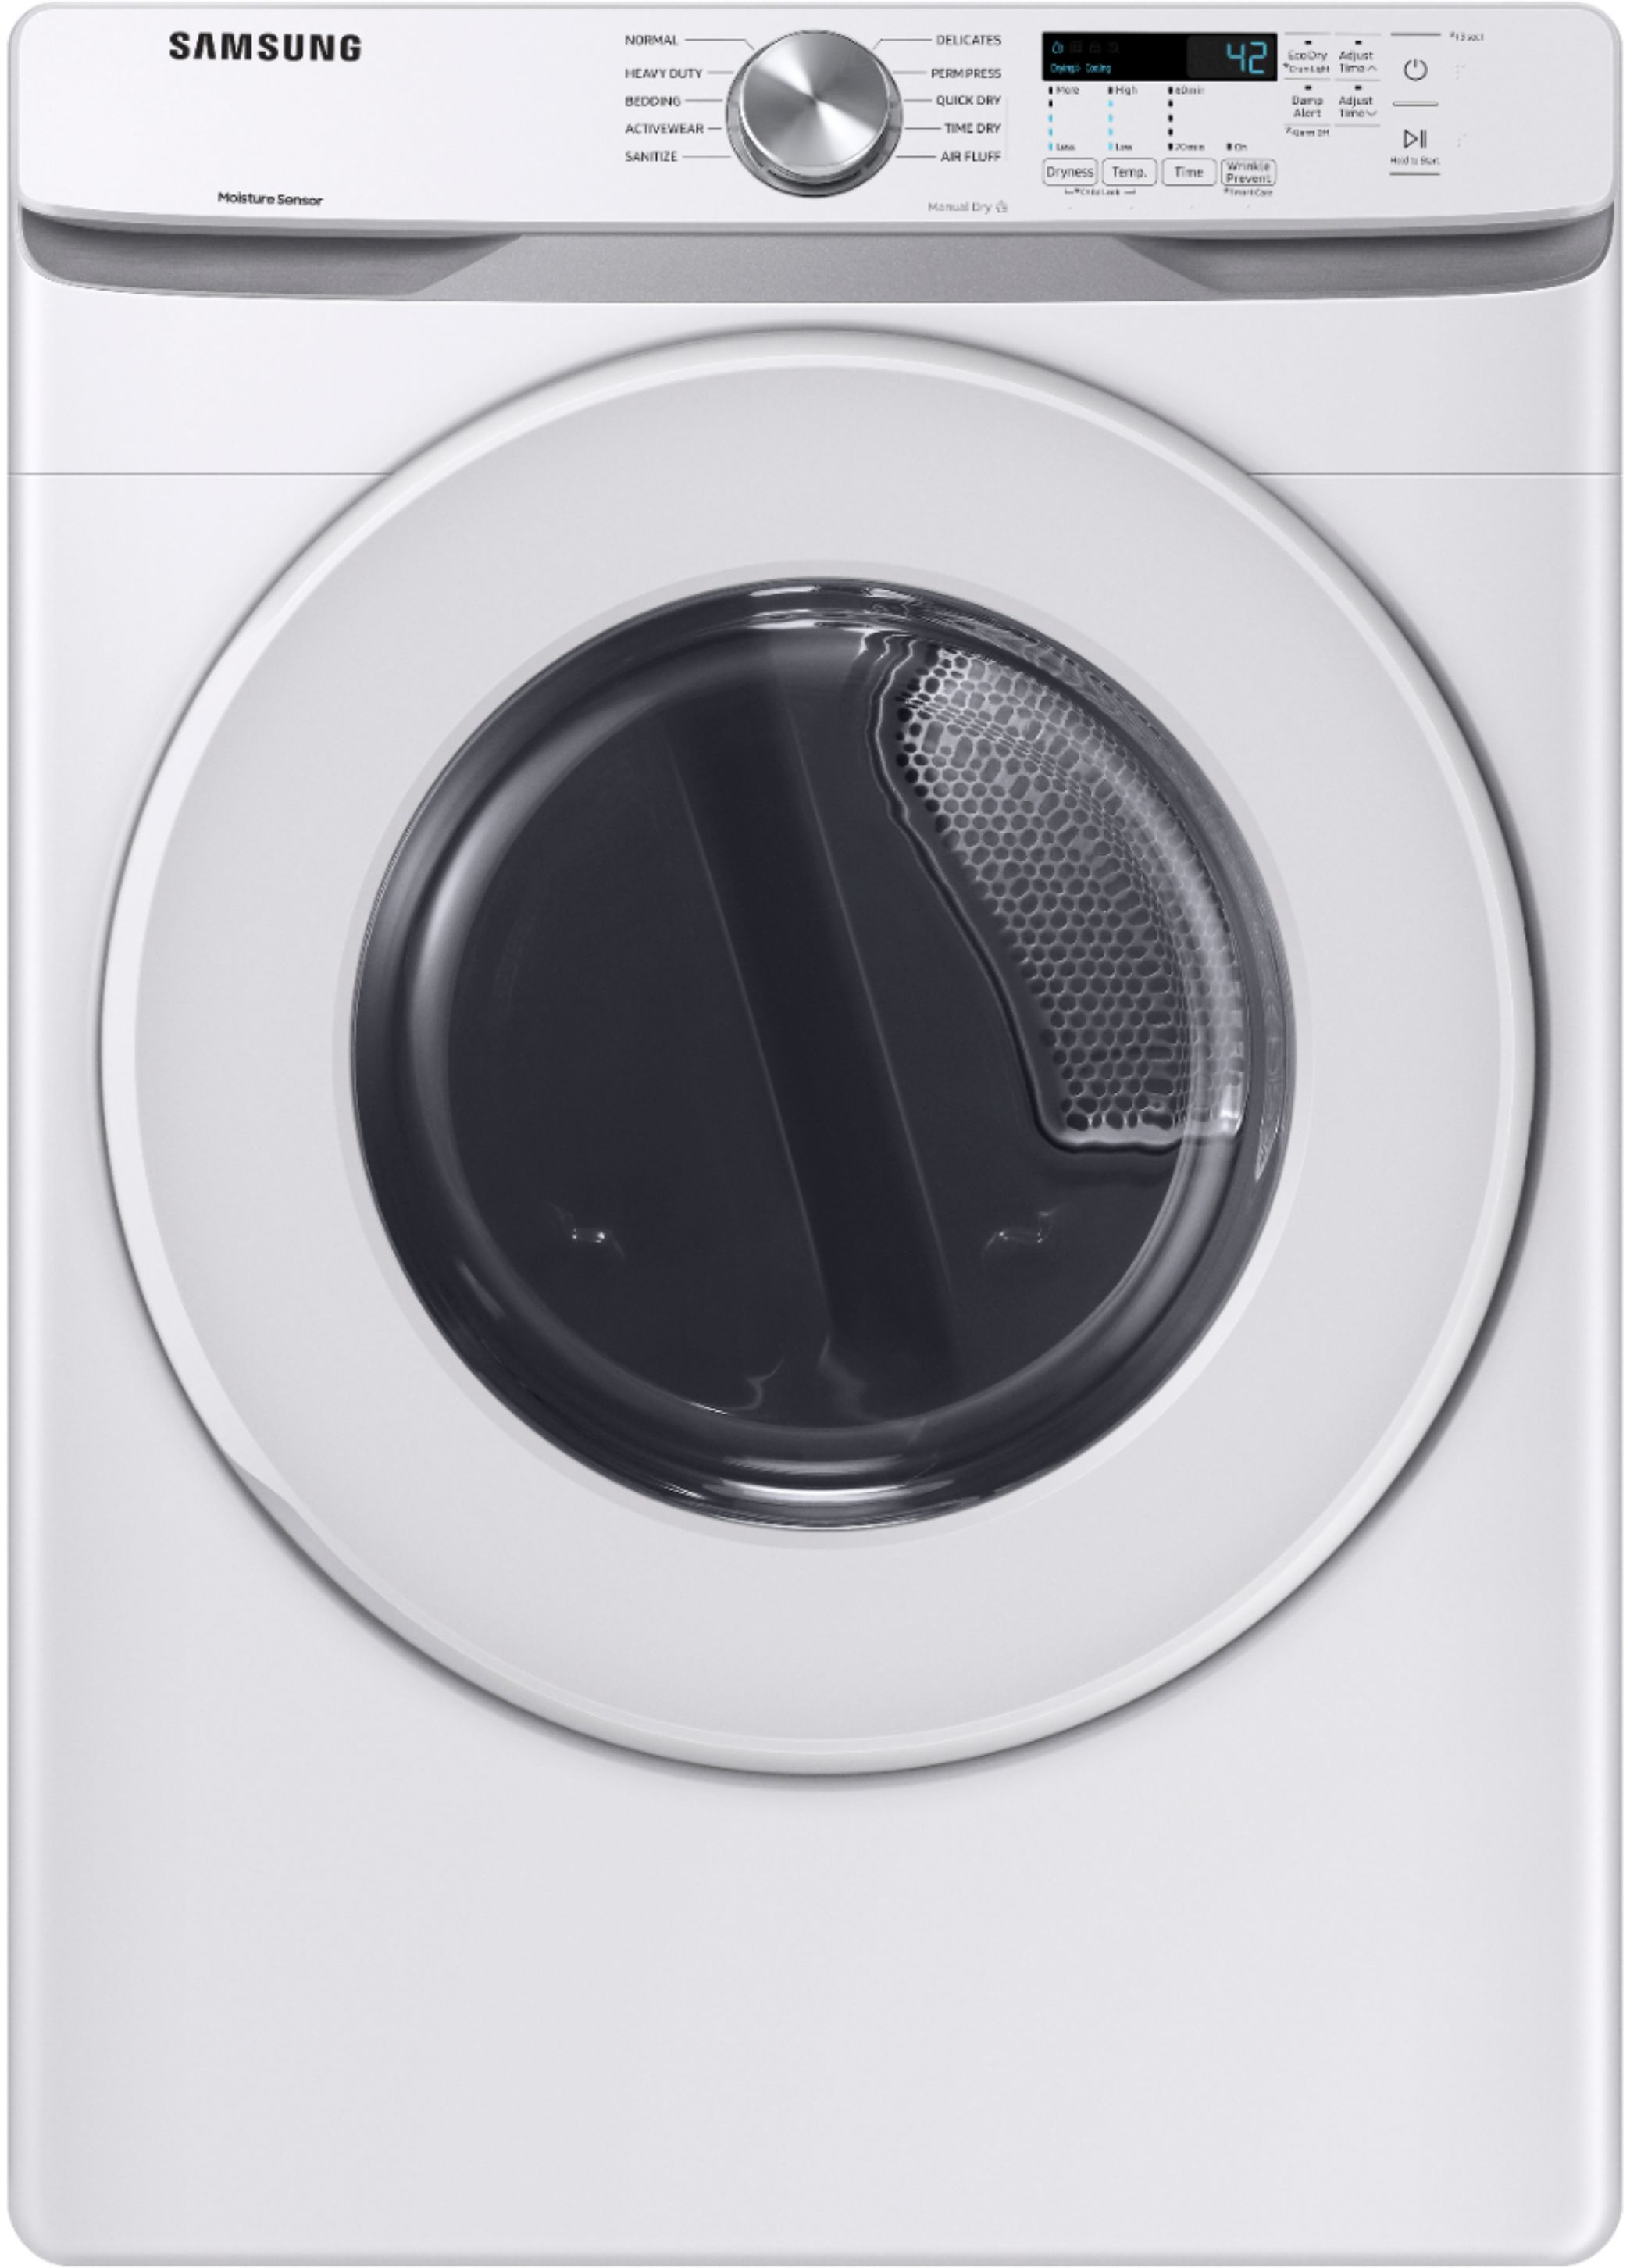 Samsung - 7.5 Cu. Ft. Long Vent Electric Dryer with Sensor Dry - White